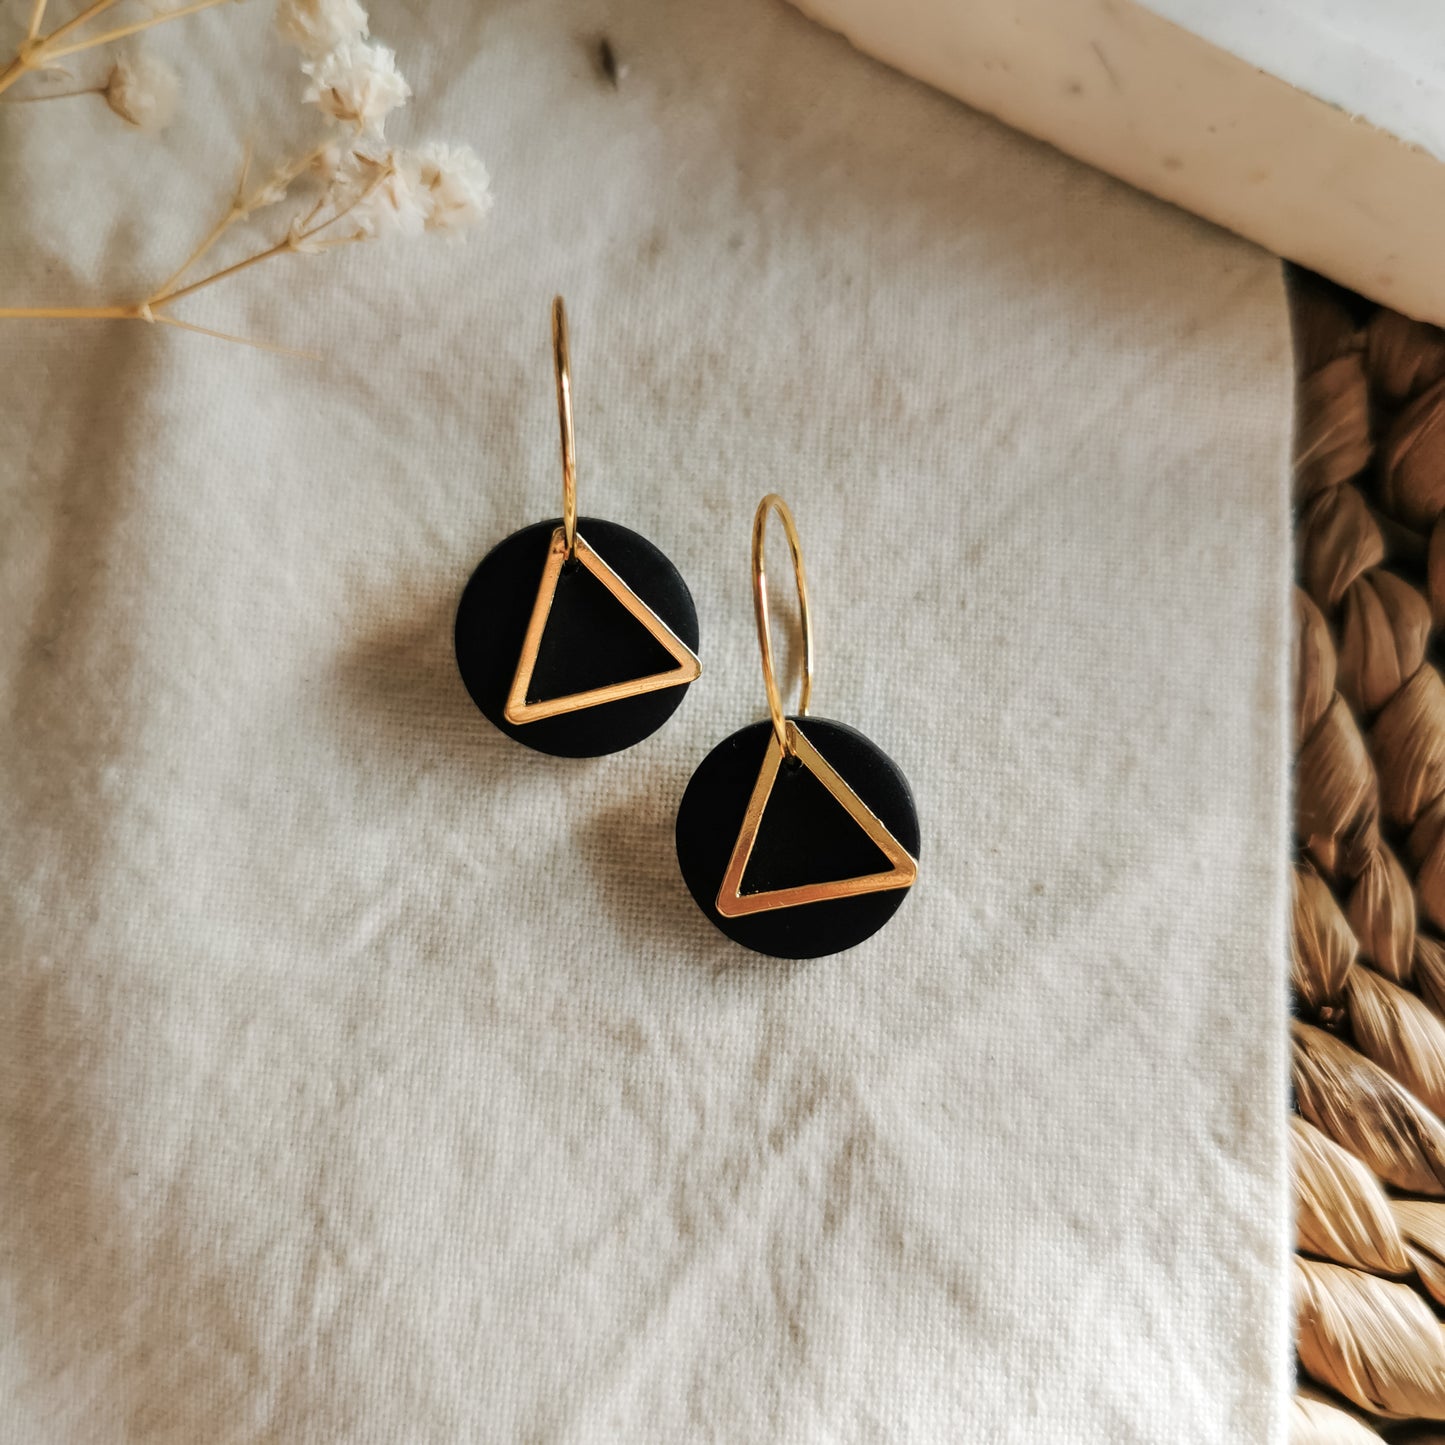 HIGAN ONEN | round drop with triangle detail 15mm hoop earrings in midnight black